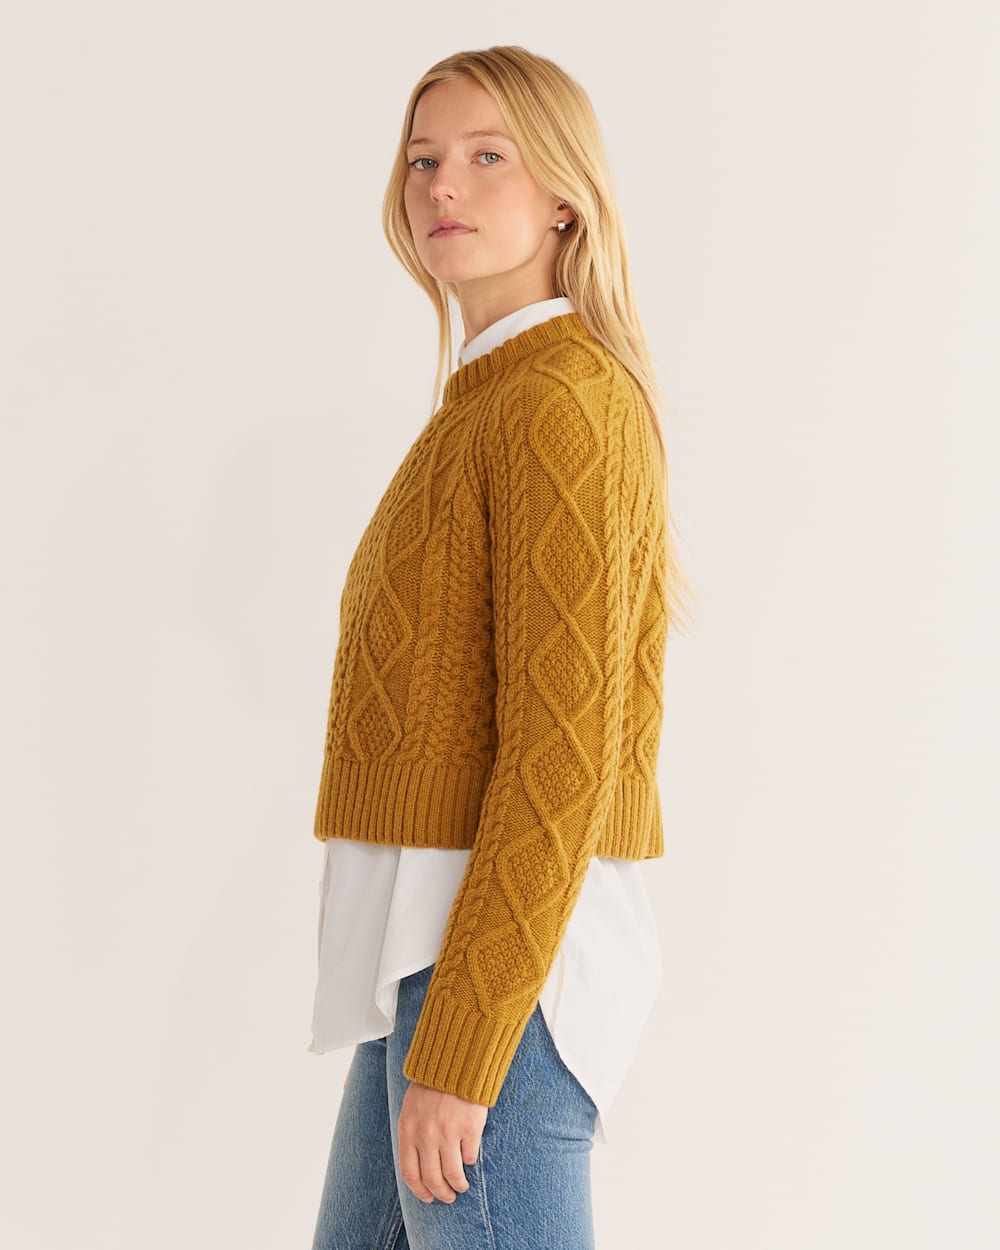 ALTERNATE VIEW OF WOMEN�S SHETLAND COLLECTION FISHERMAN SWEATER IN DEEP GOLD image number 2